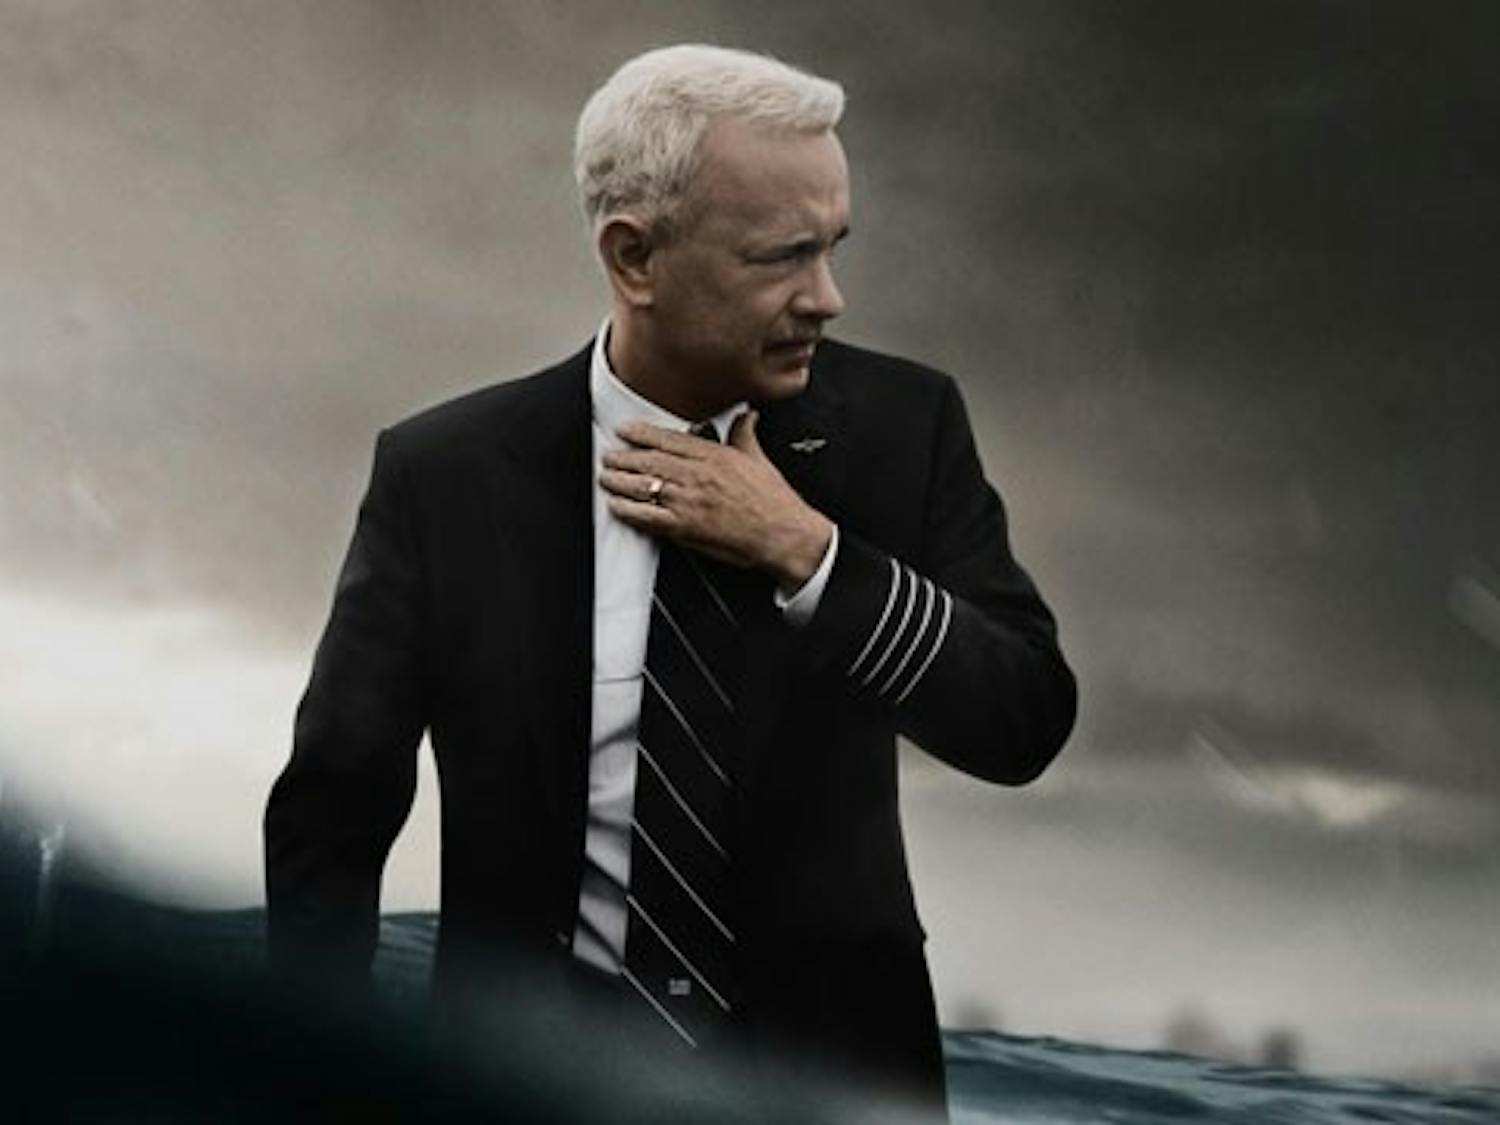 "Sully" poster. Taken from comingsoon.net.